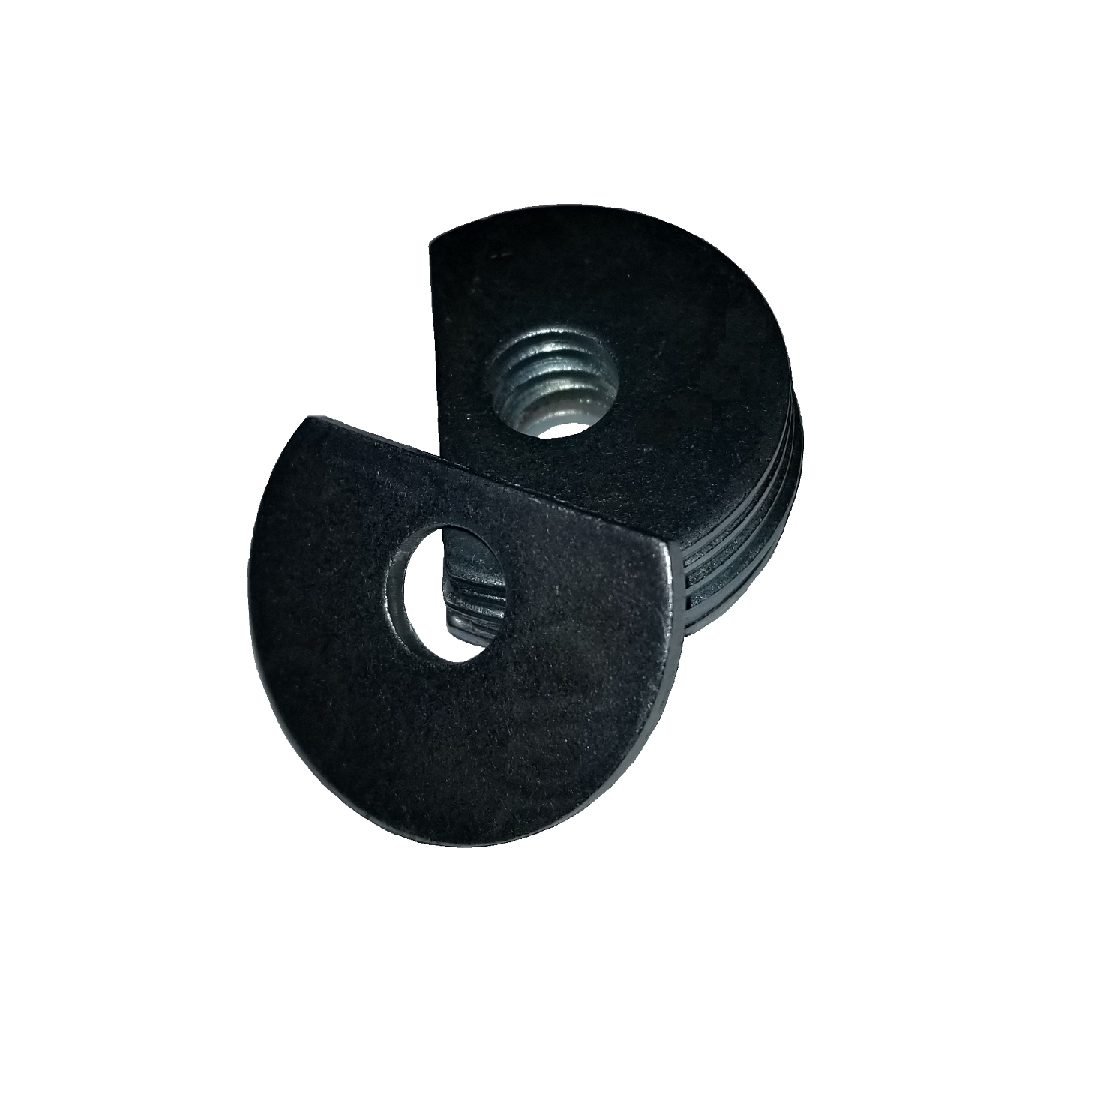 Clipped OD Washer - 1.062 ID, 2.750 OD, 0.380 Thick, Low Carbon Steel - Soft